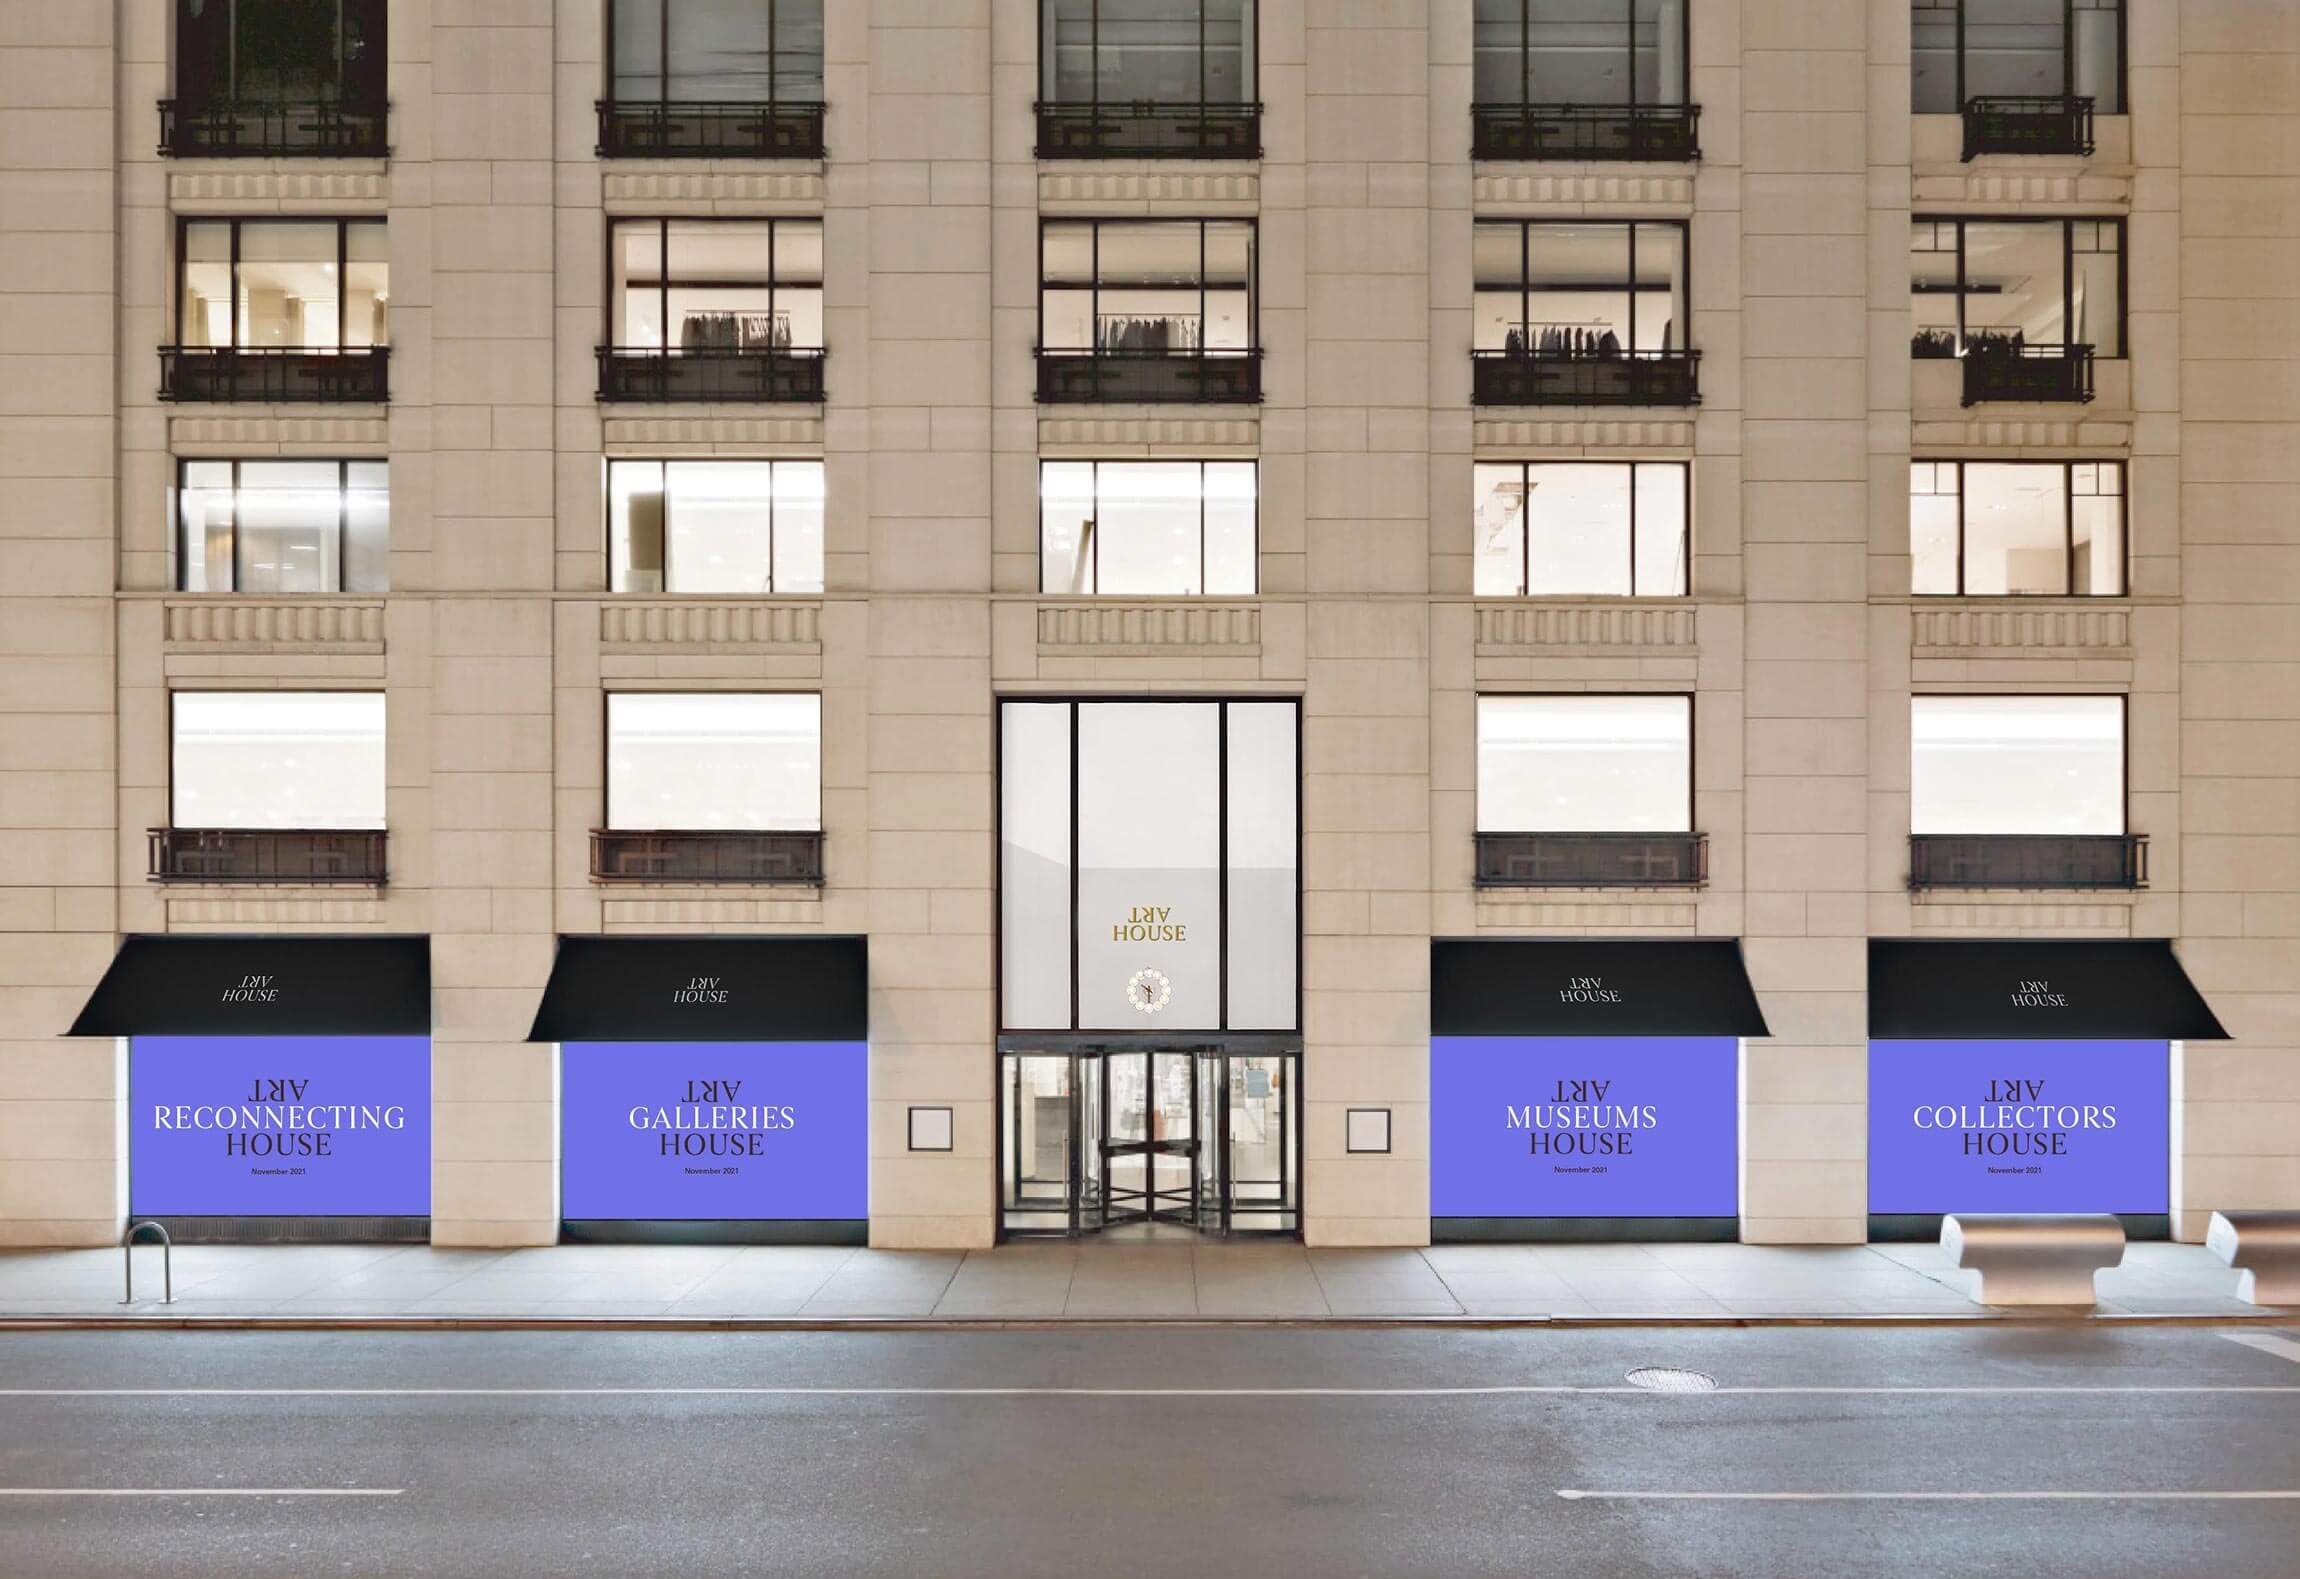 Barneys is downsizing its Madison Avenue store: sources